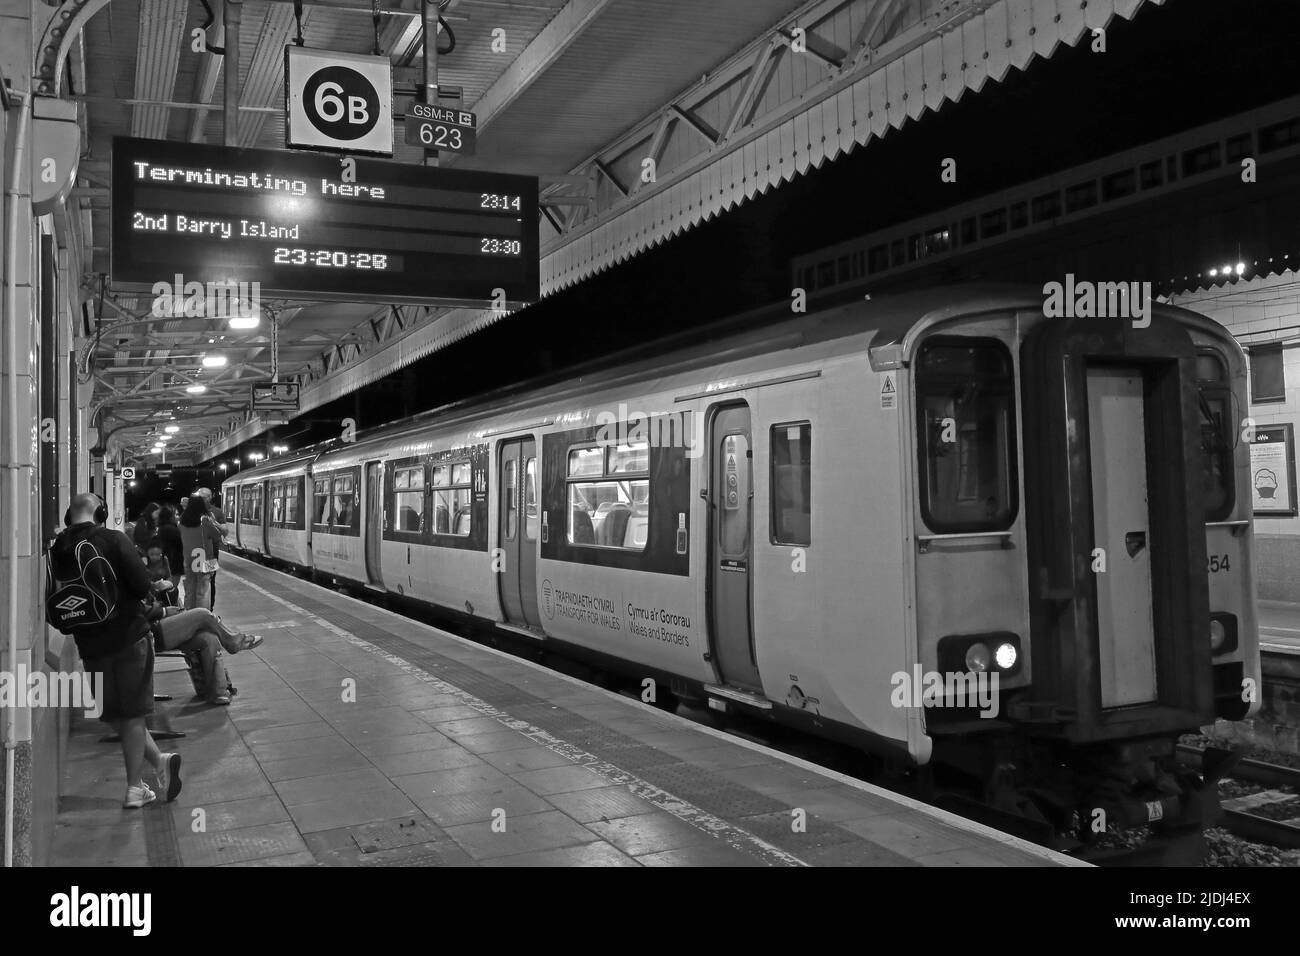 Cardiff Central platform 6b, last night TfW train, to Barry Island, Cardiff Central, Central Square, Cardiff, Wales, UK, CF10 1EP Stock Photo